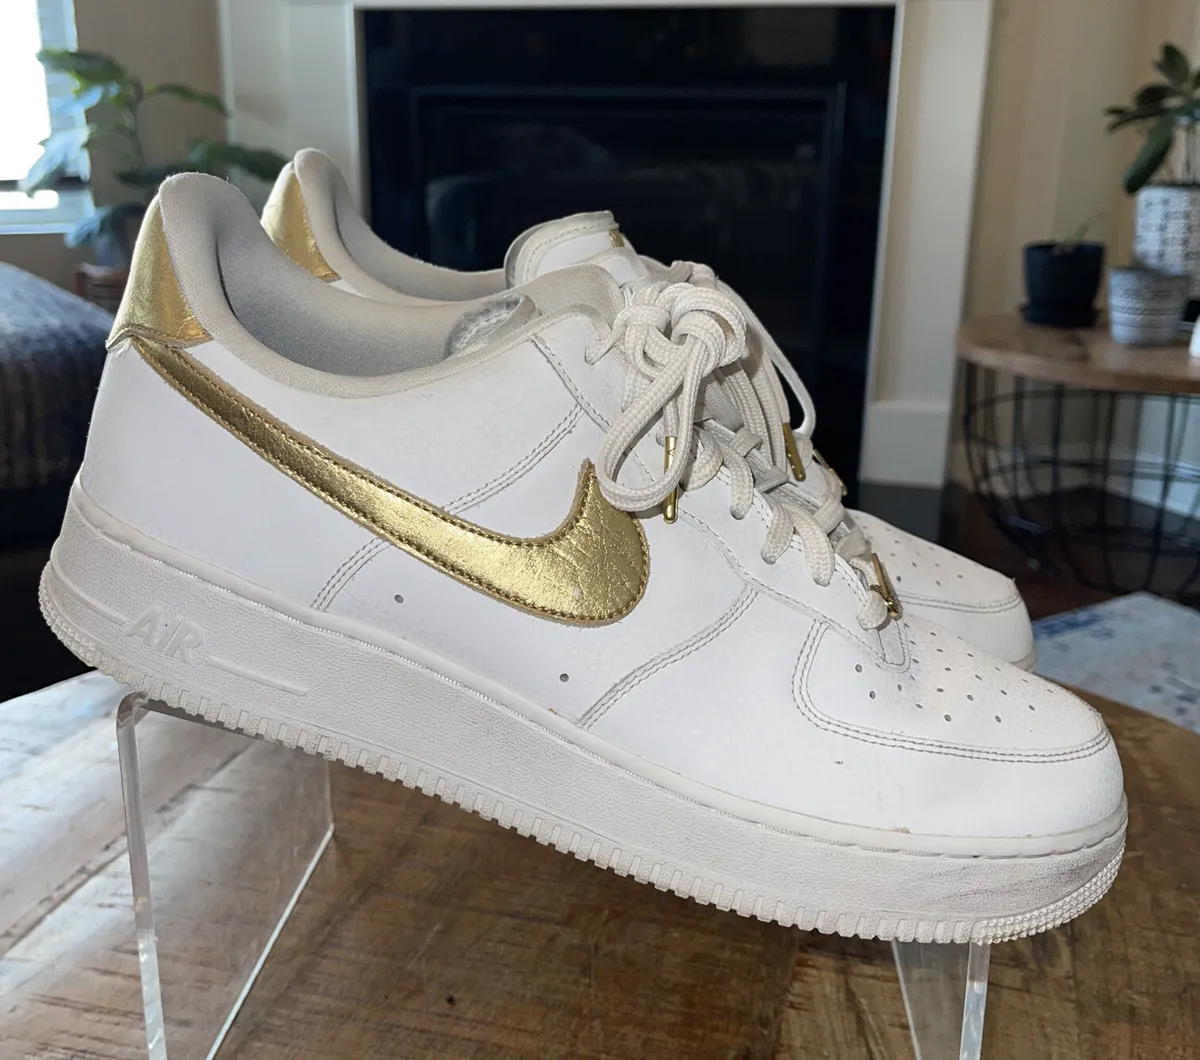 Size 12 Nike Air Force 1 '07 LV8 Gold Foil Swoosh White/Gold Olympic Men's  Shoes